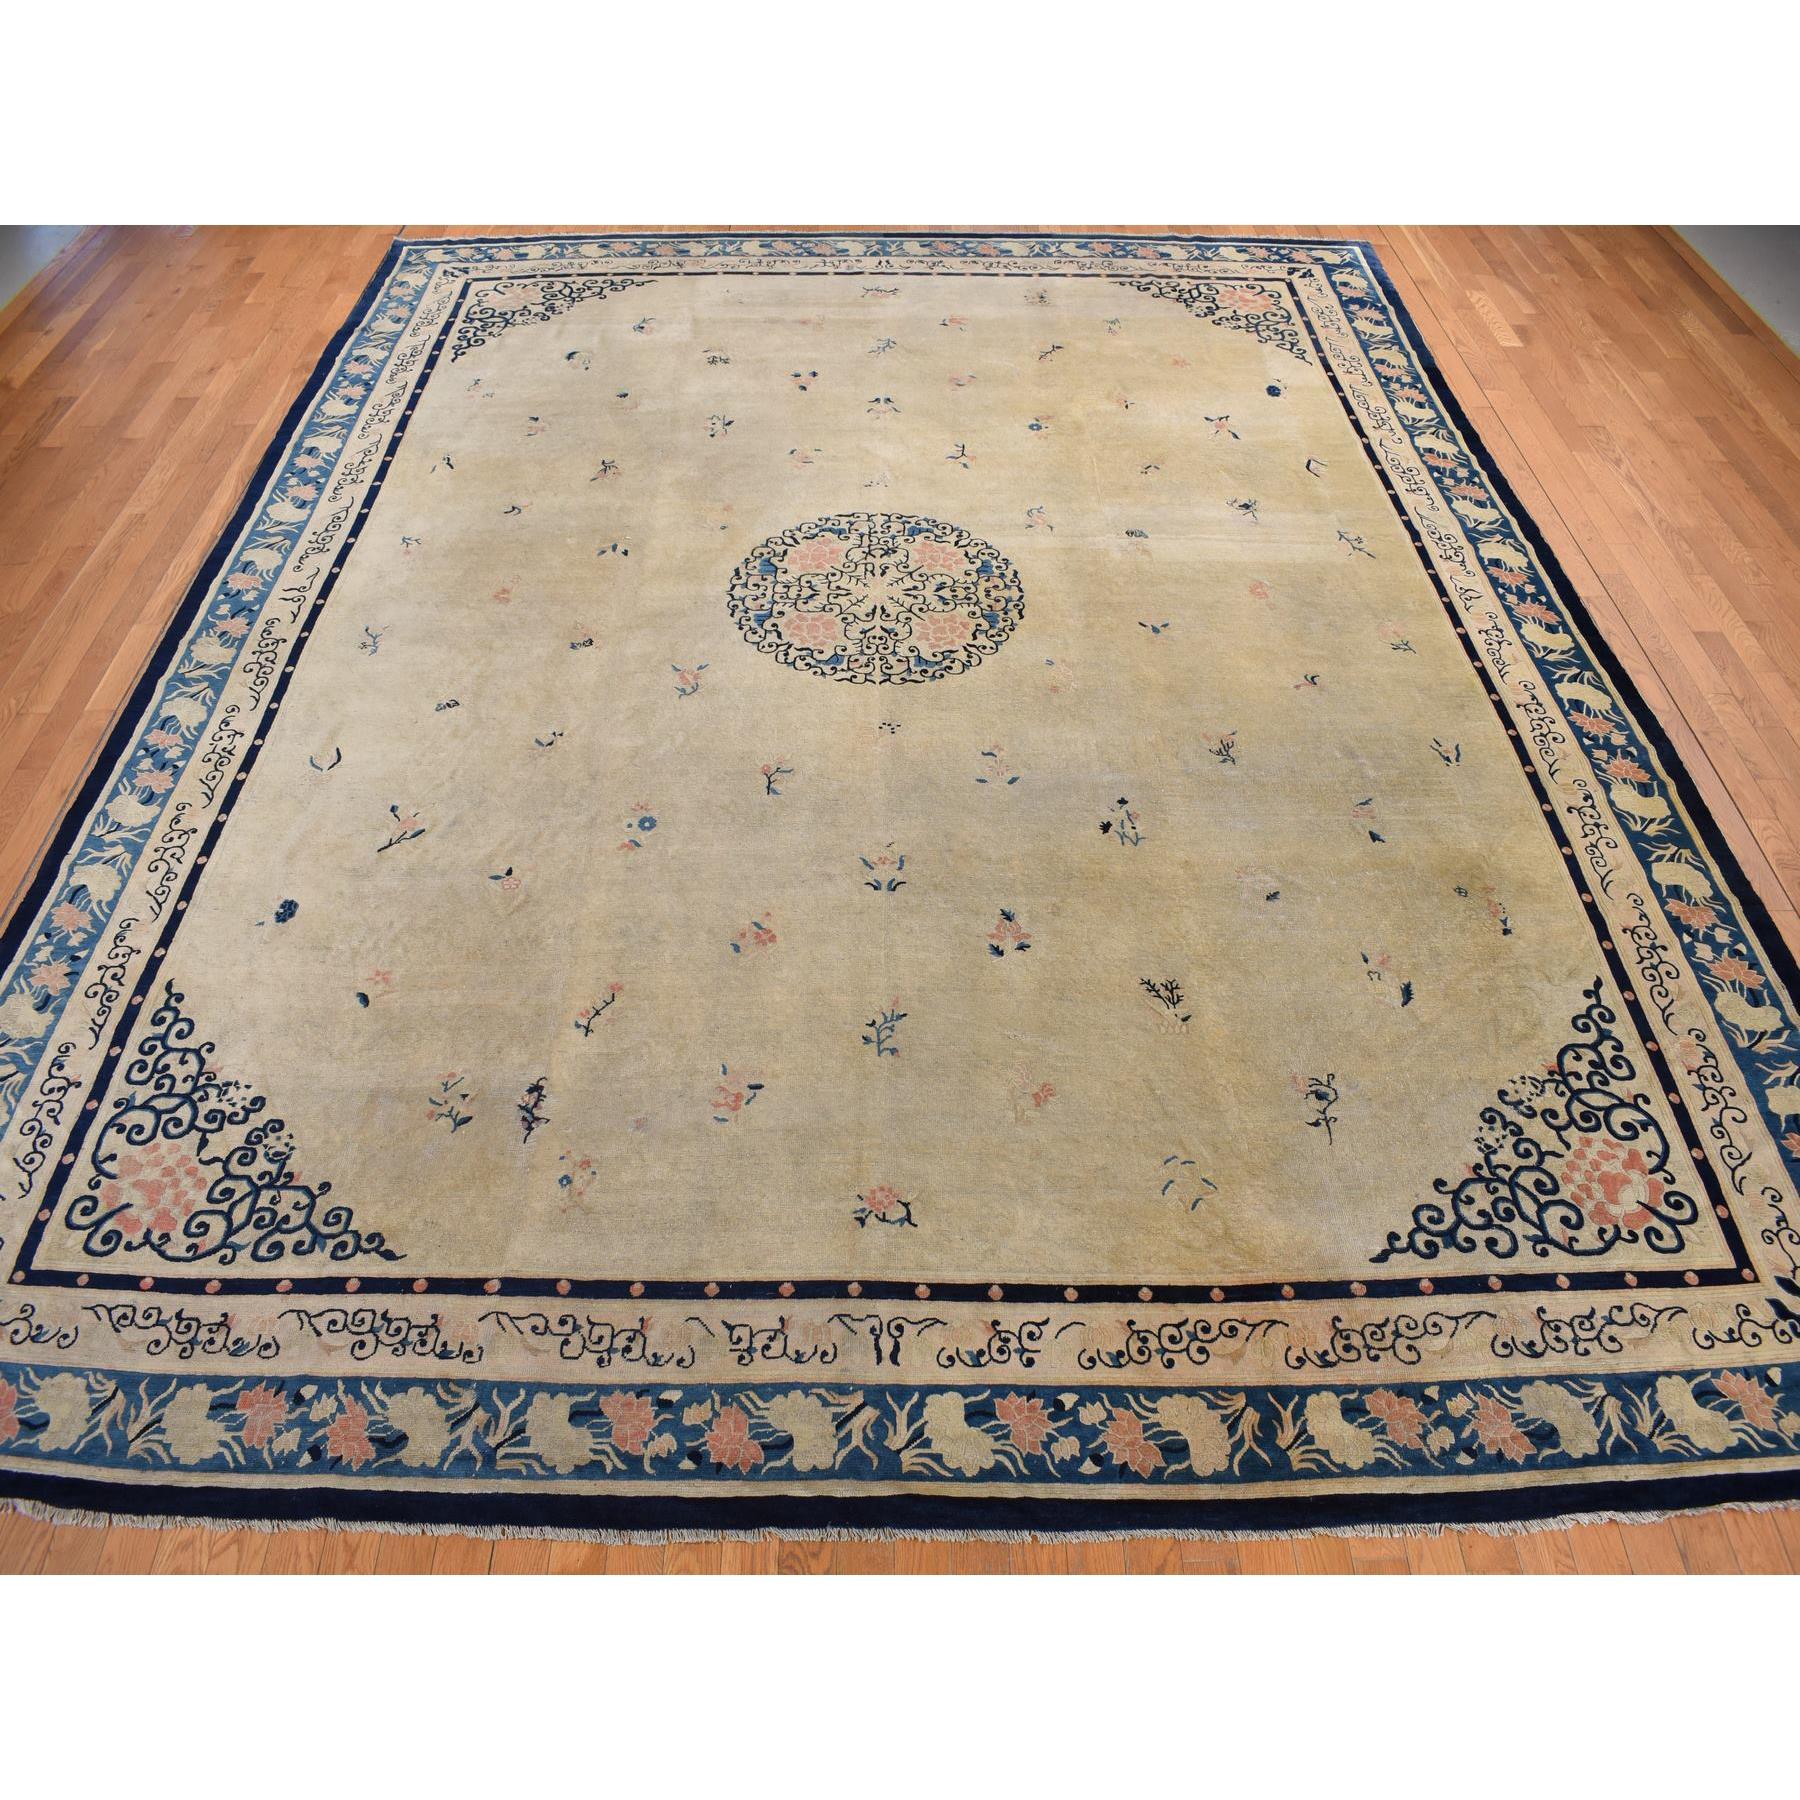 This fabulous Hand-Knotted carpet has been created and designed for extra strength and durability. This rug has been handcrafted for weeks in the traditional method that is used to make
Exact Rug Size in Feet and Inches : 12' x 14'1